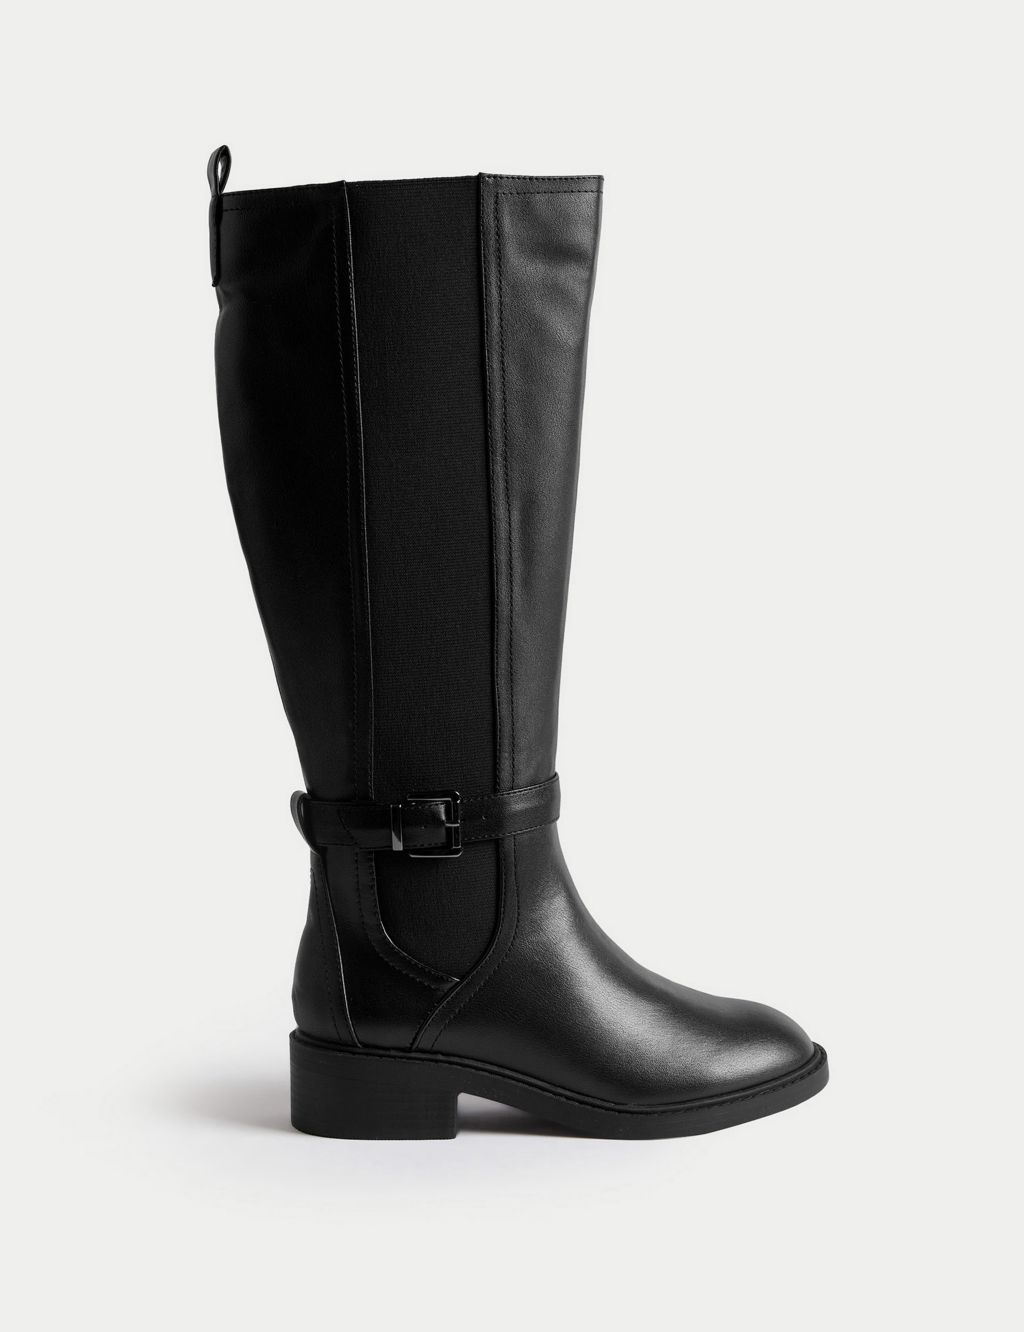 Riding Buckle Flat Knee High Boots image 1